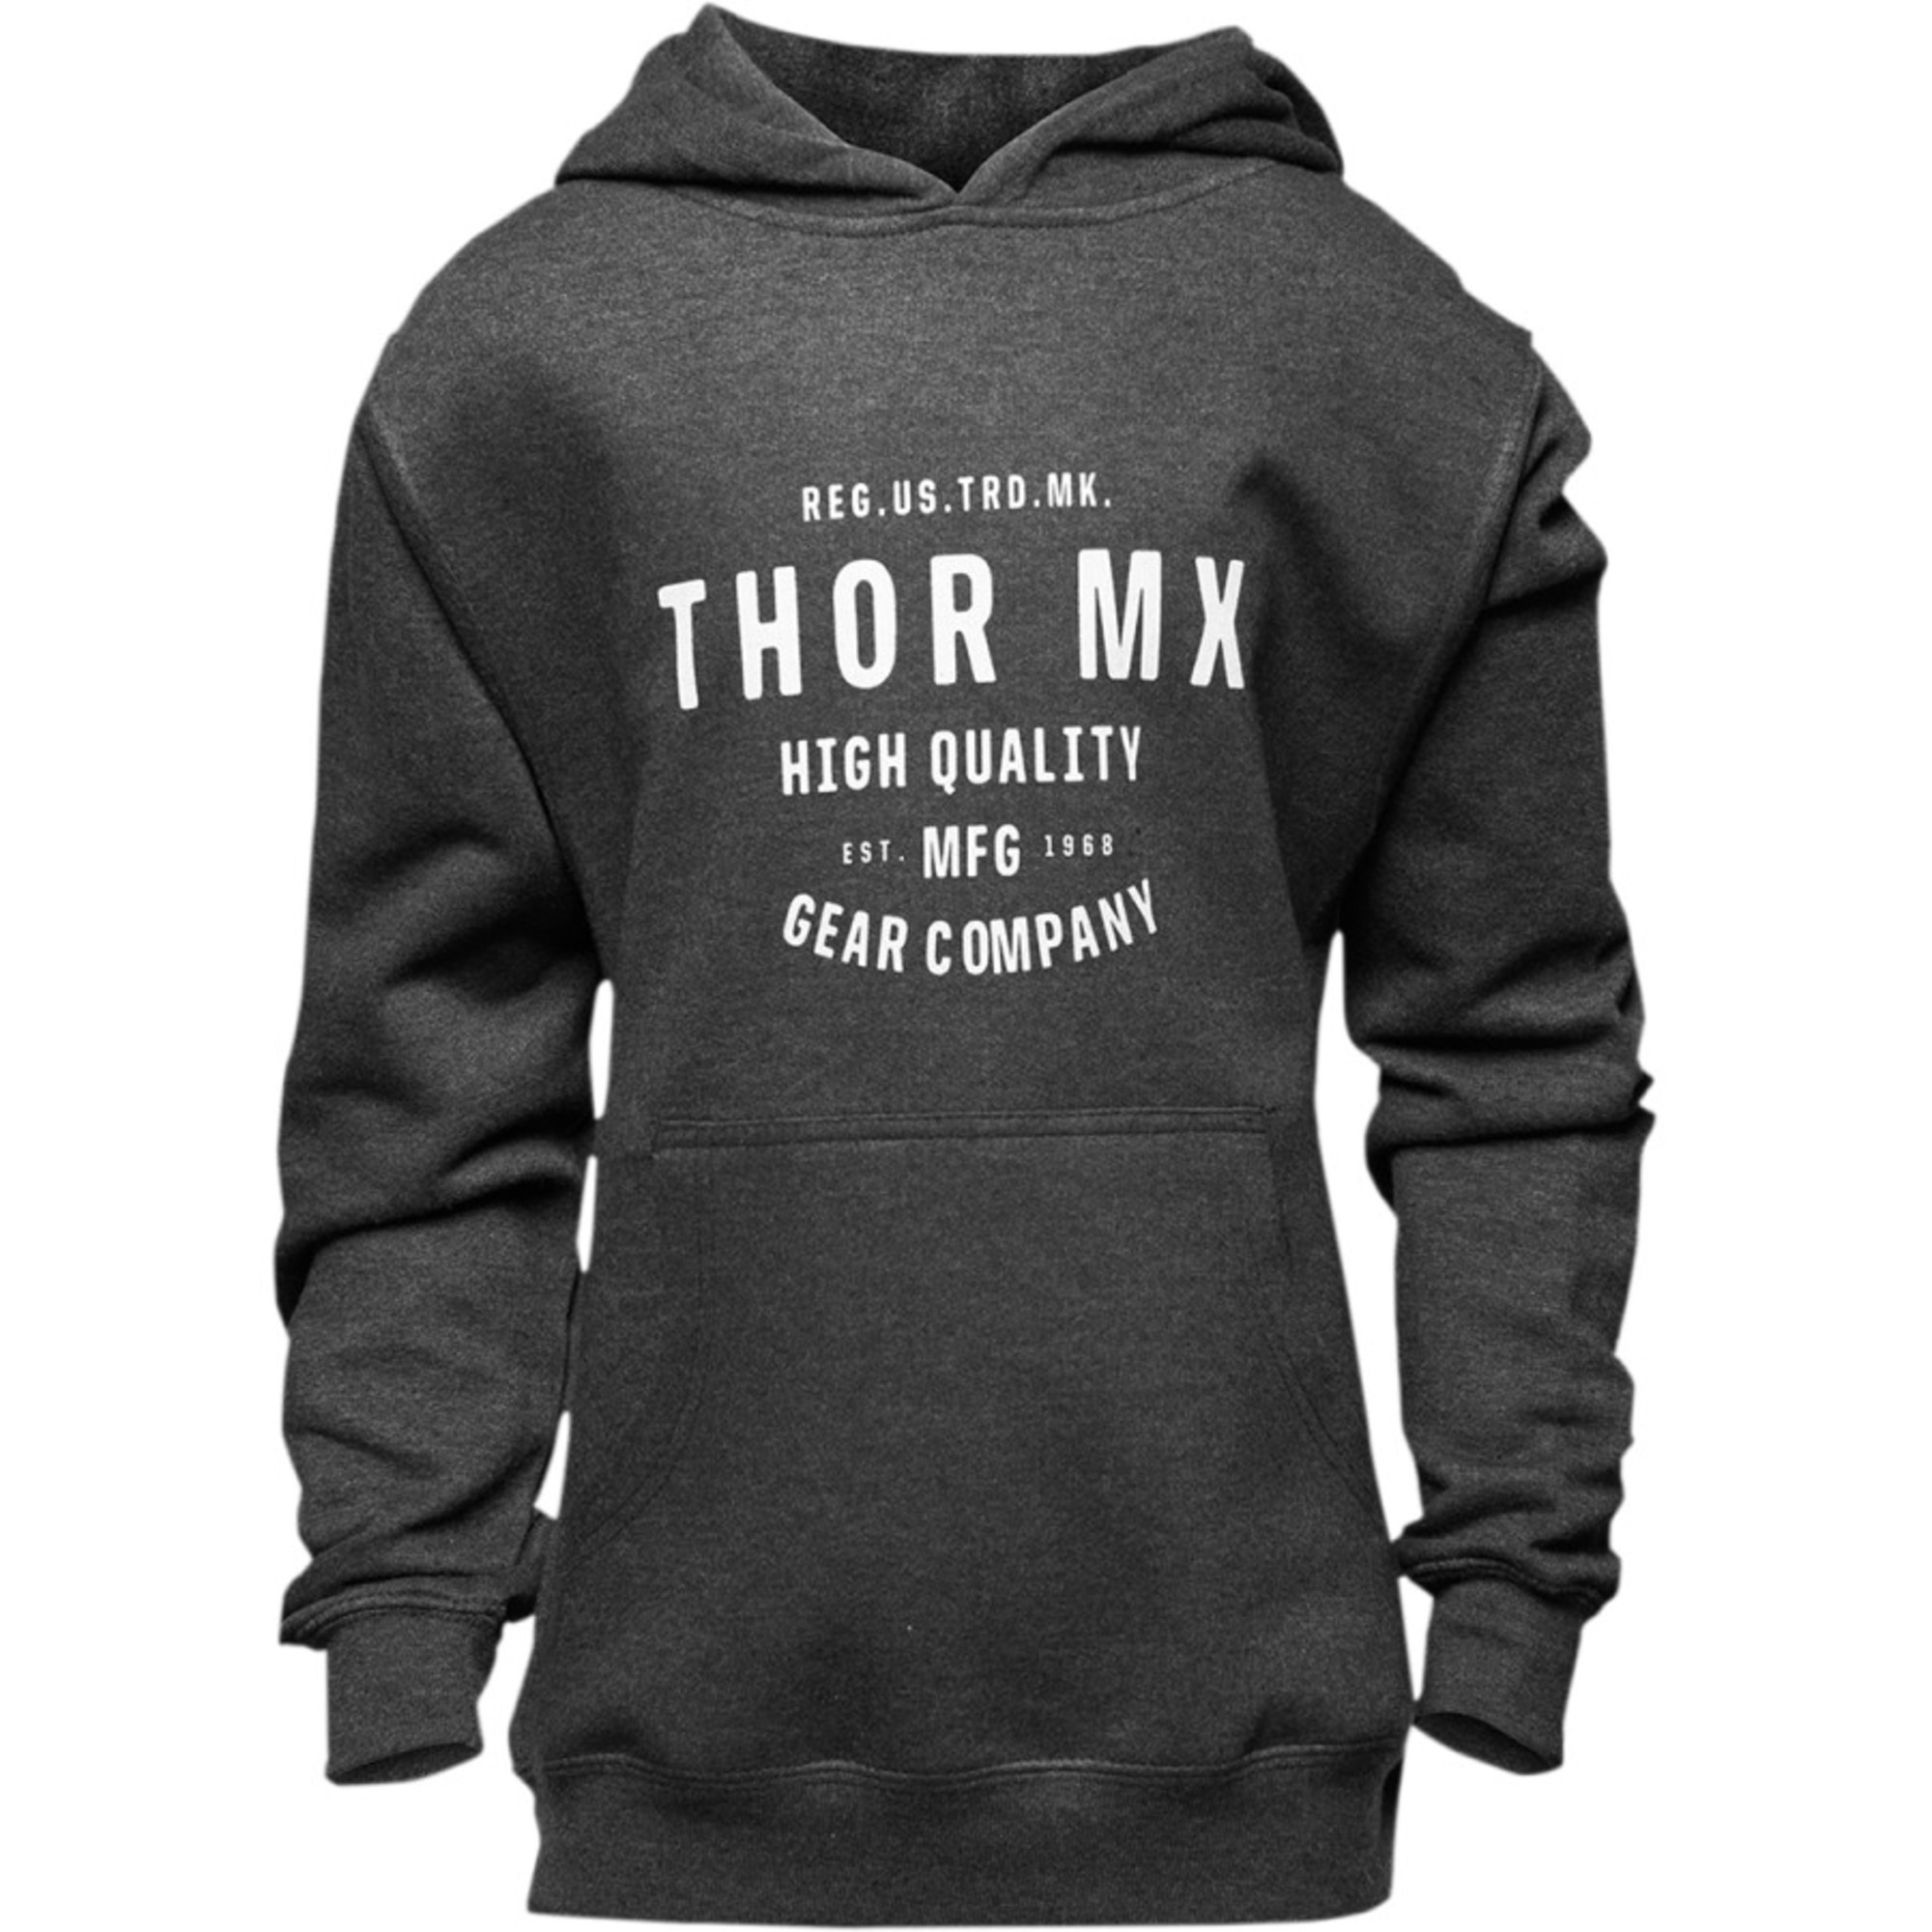 mode enfants kangourous par thor pour girls crafted pullover